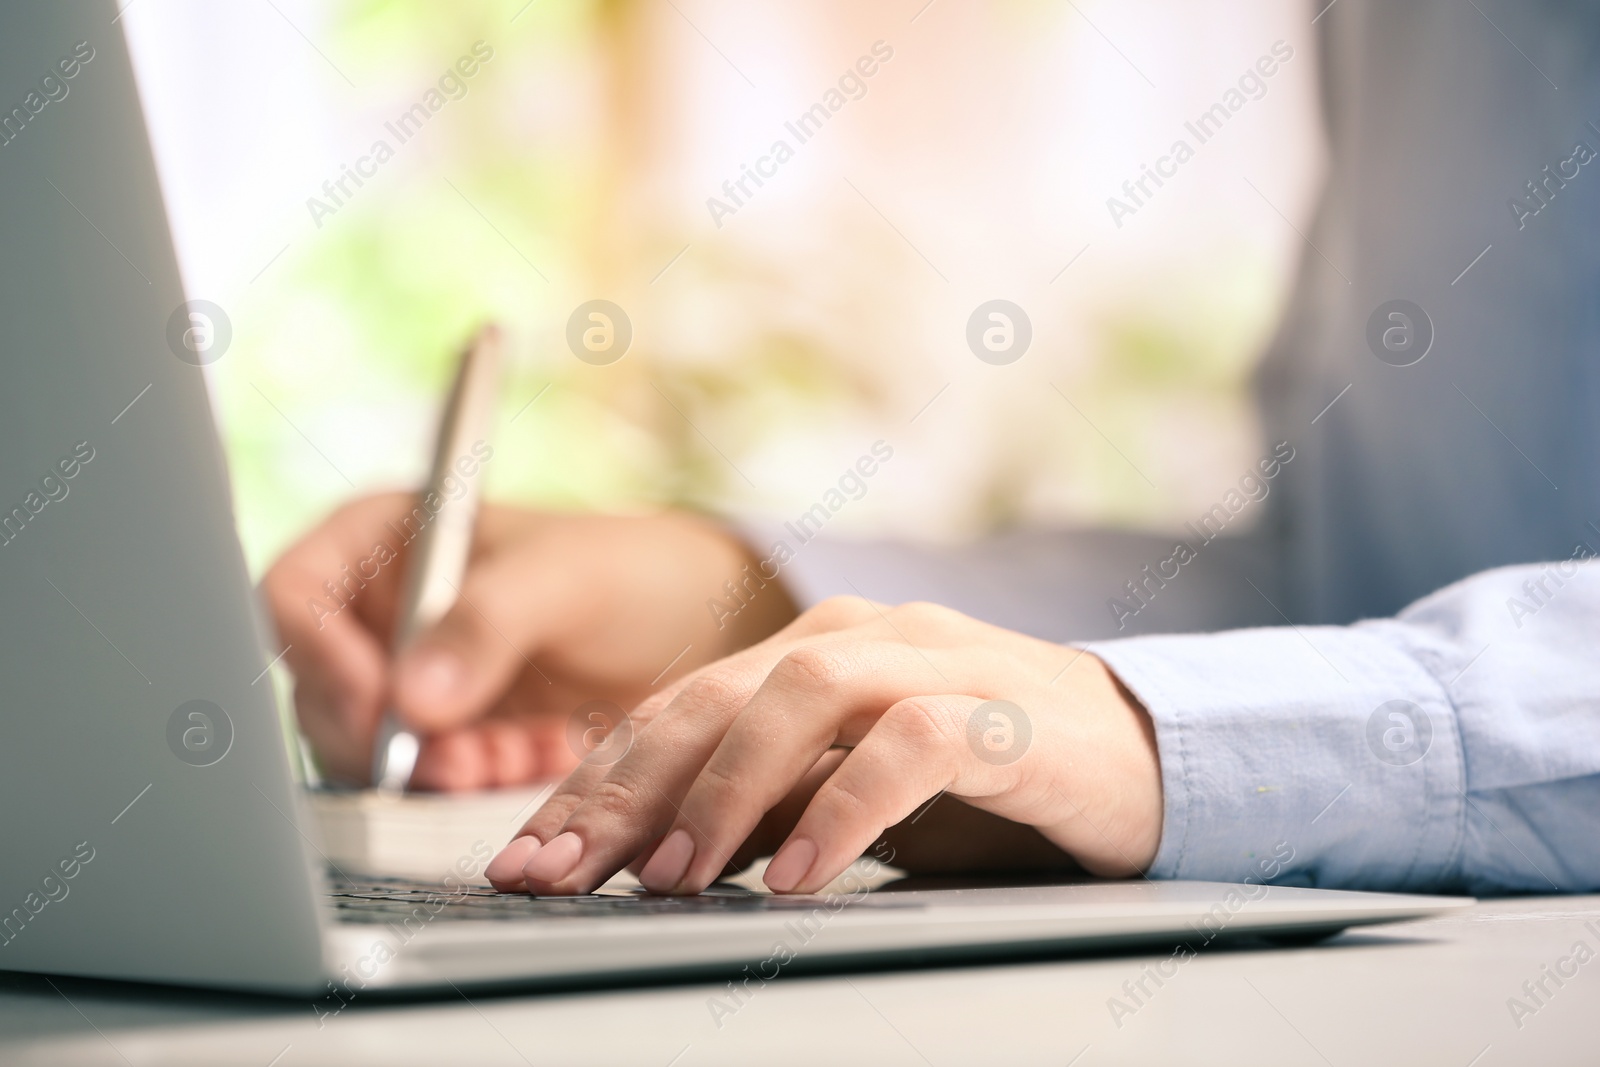 Image of Journalist working with laptop at table, closeup